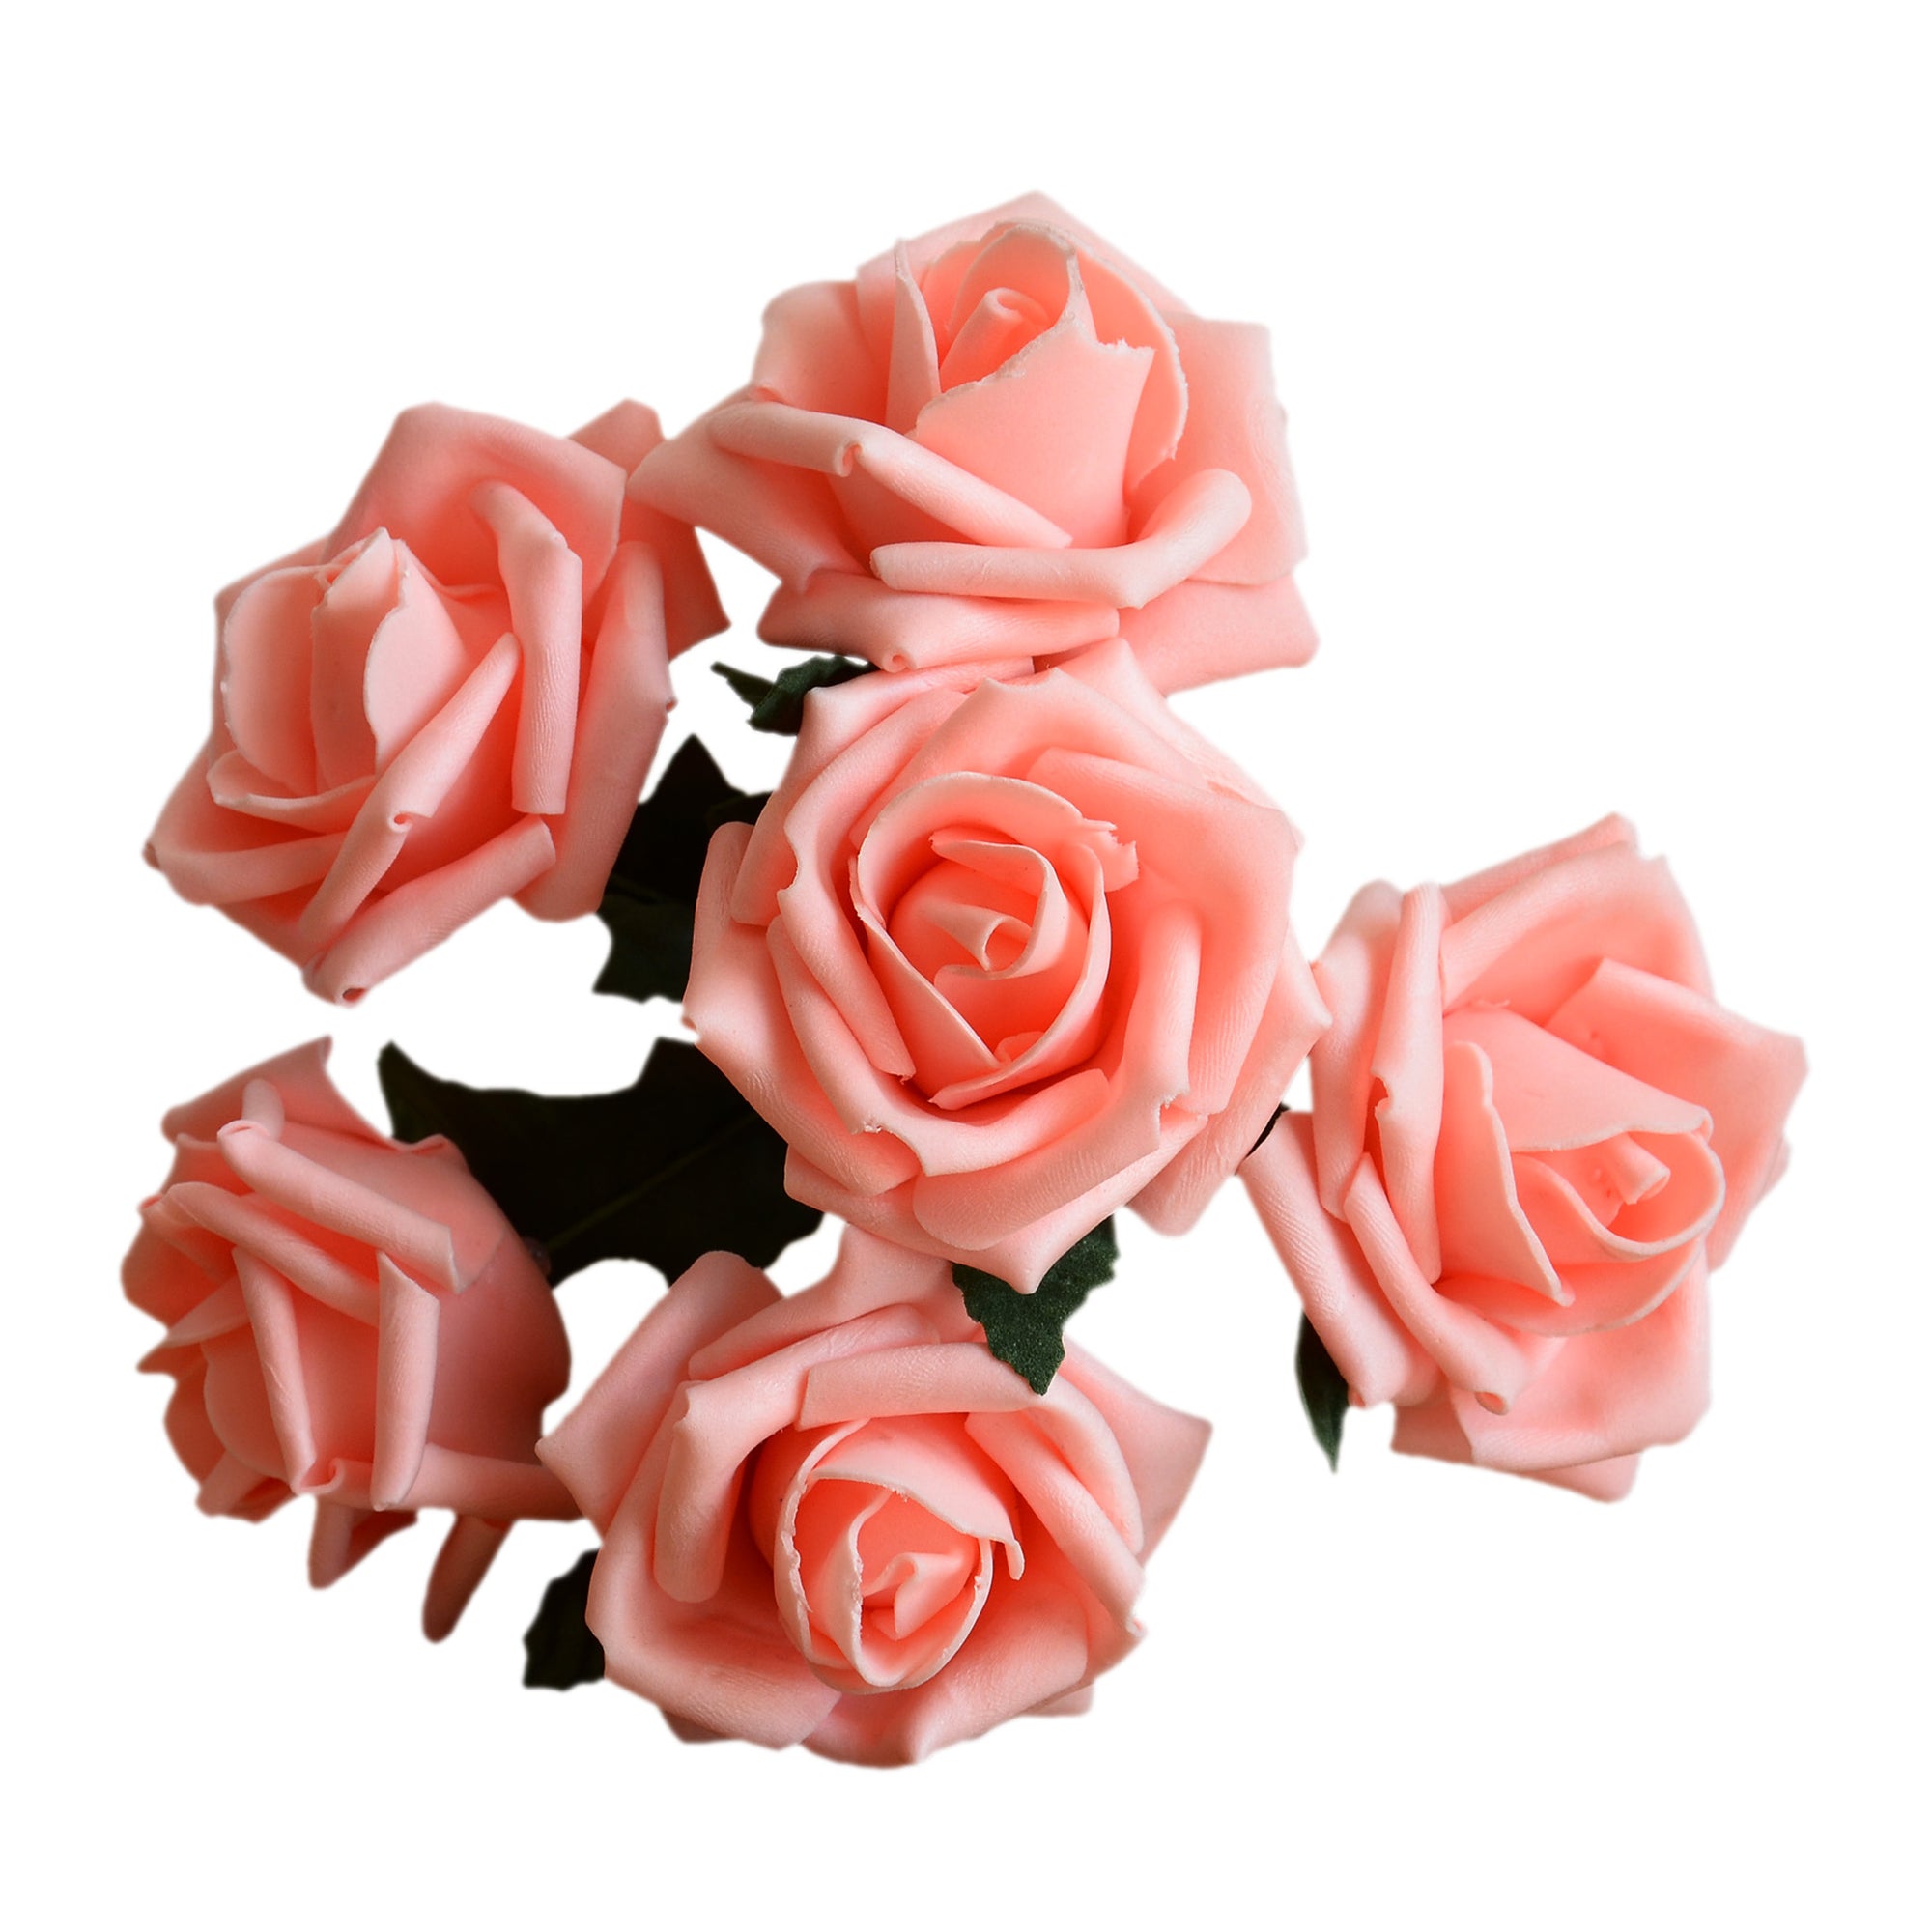 Peach Pink Wedding Flowers Fake Roses for Bridal Bouquets